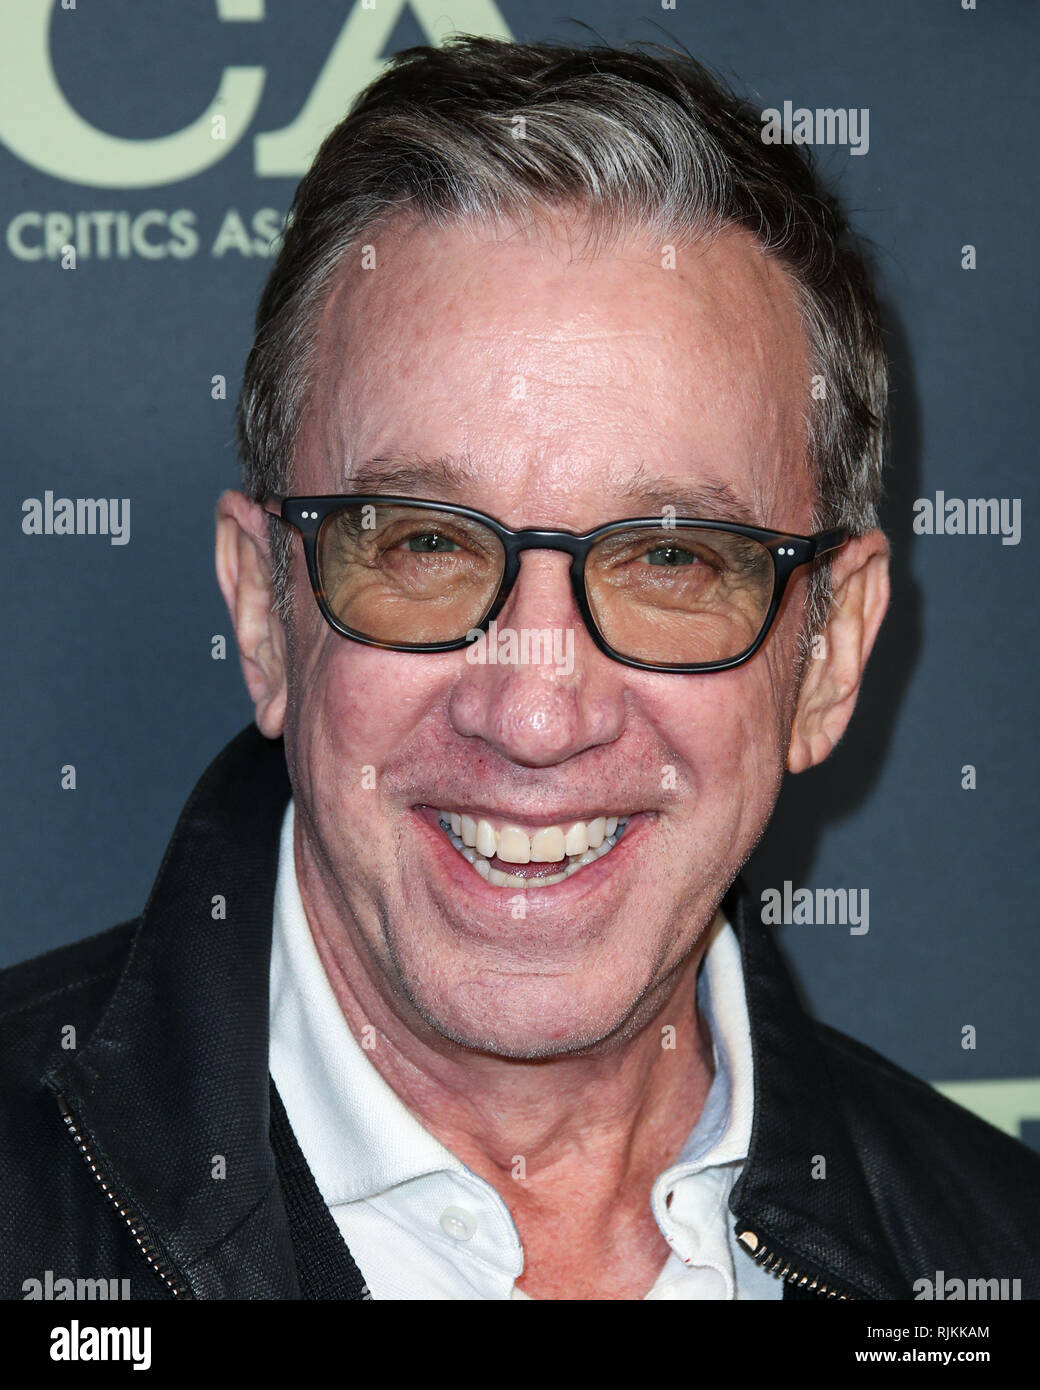 PASADENA, LOS ANGELES, CA, USA - FEBRUARY 06: Actor Tim Allen arrives at the FOX Winter TCA 2019 All-Star Party held at The Fig House on February 6, in Pasadena, Los